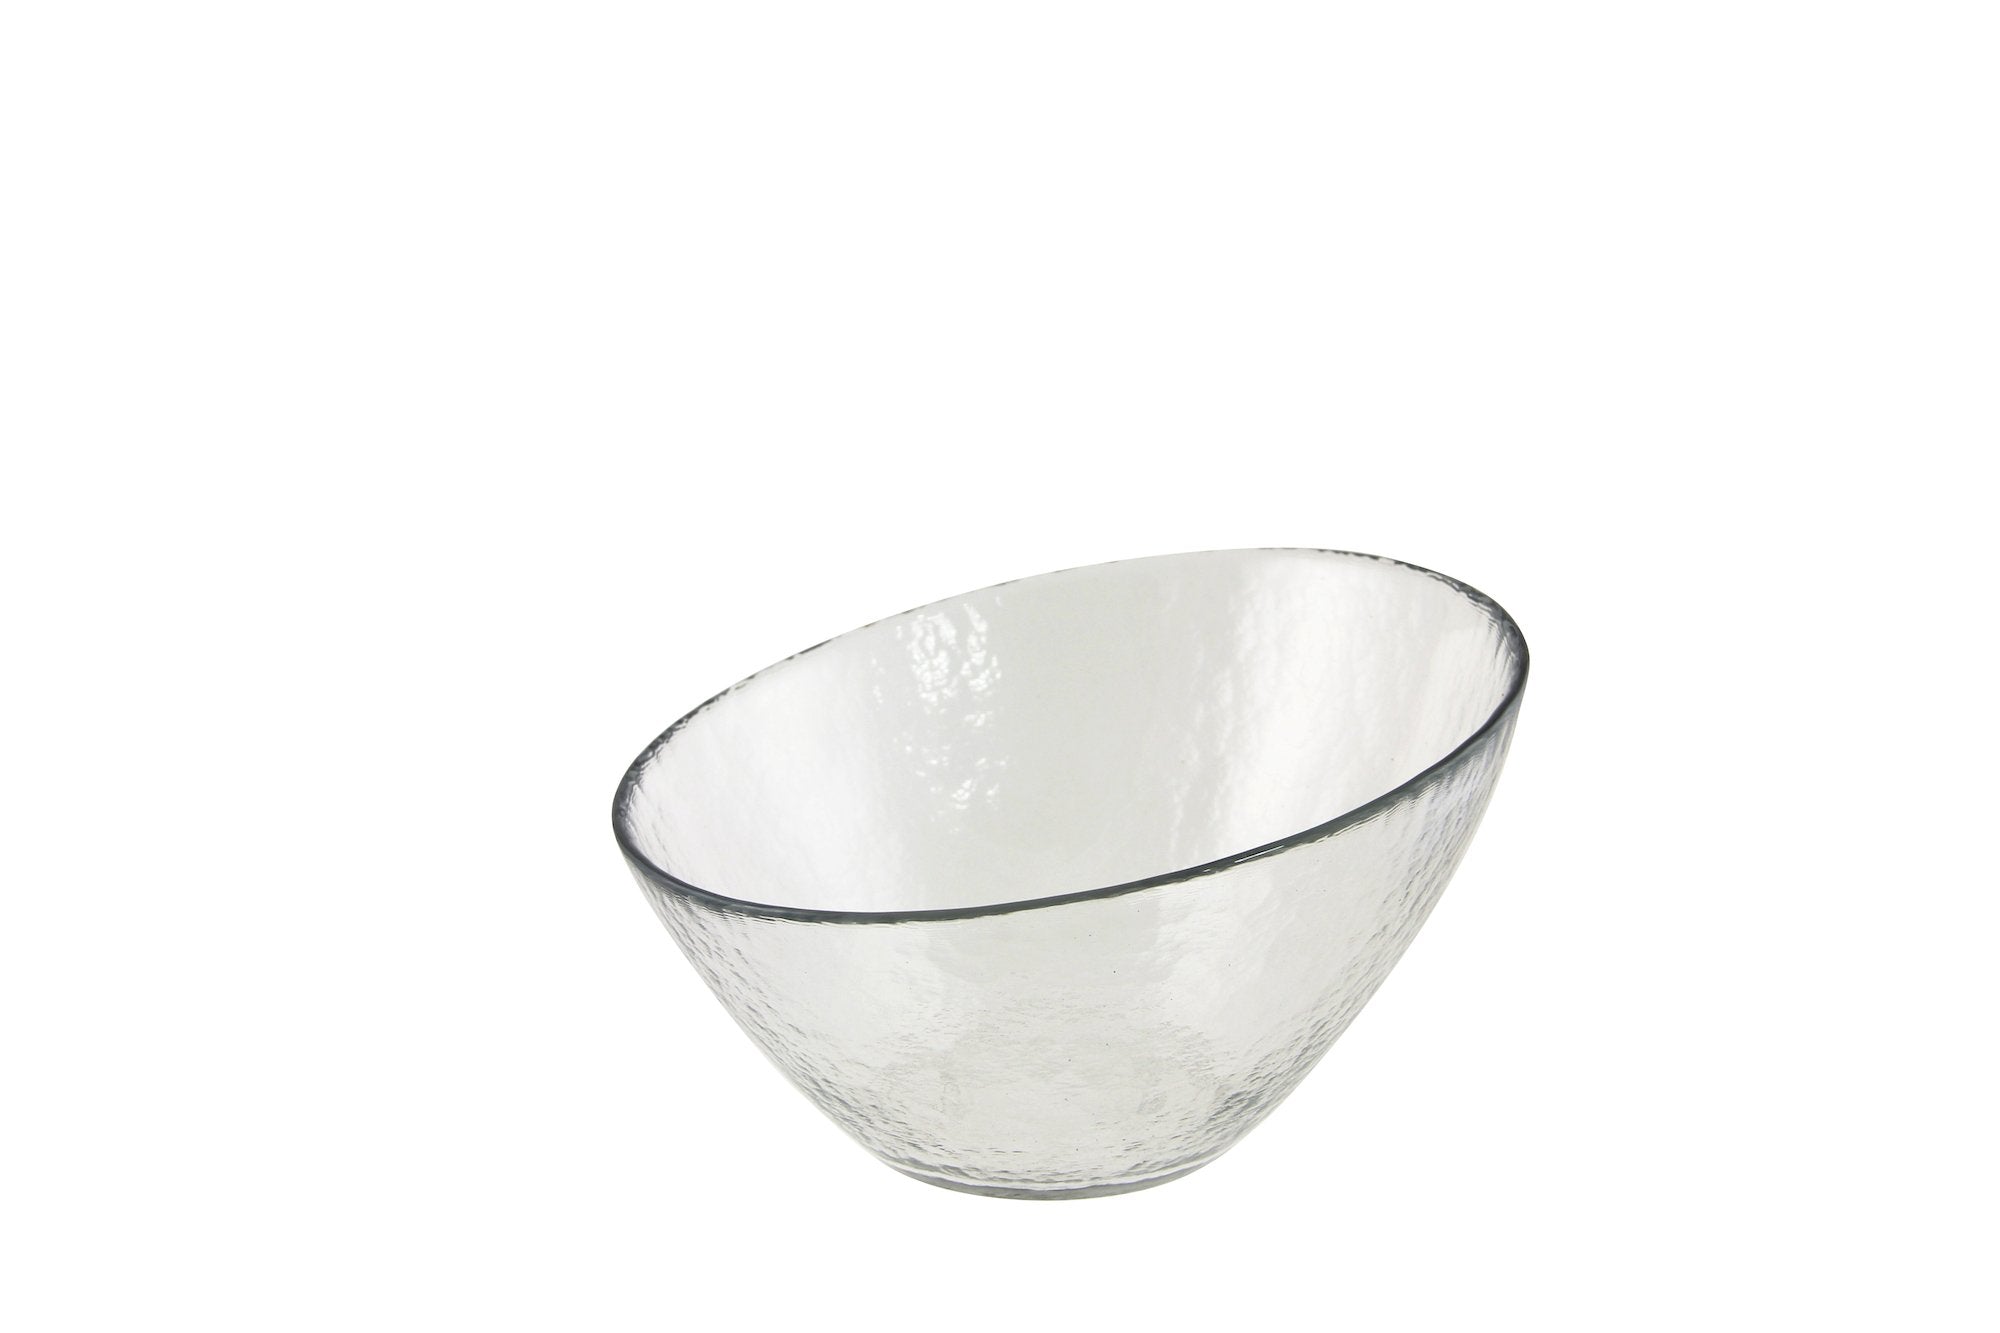 Dinnerware, Angled Glass Bowl  (24/Case) - iFoodservice Online